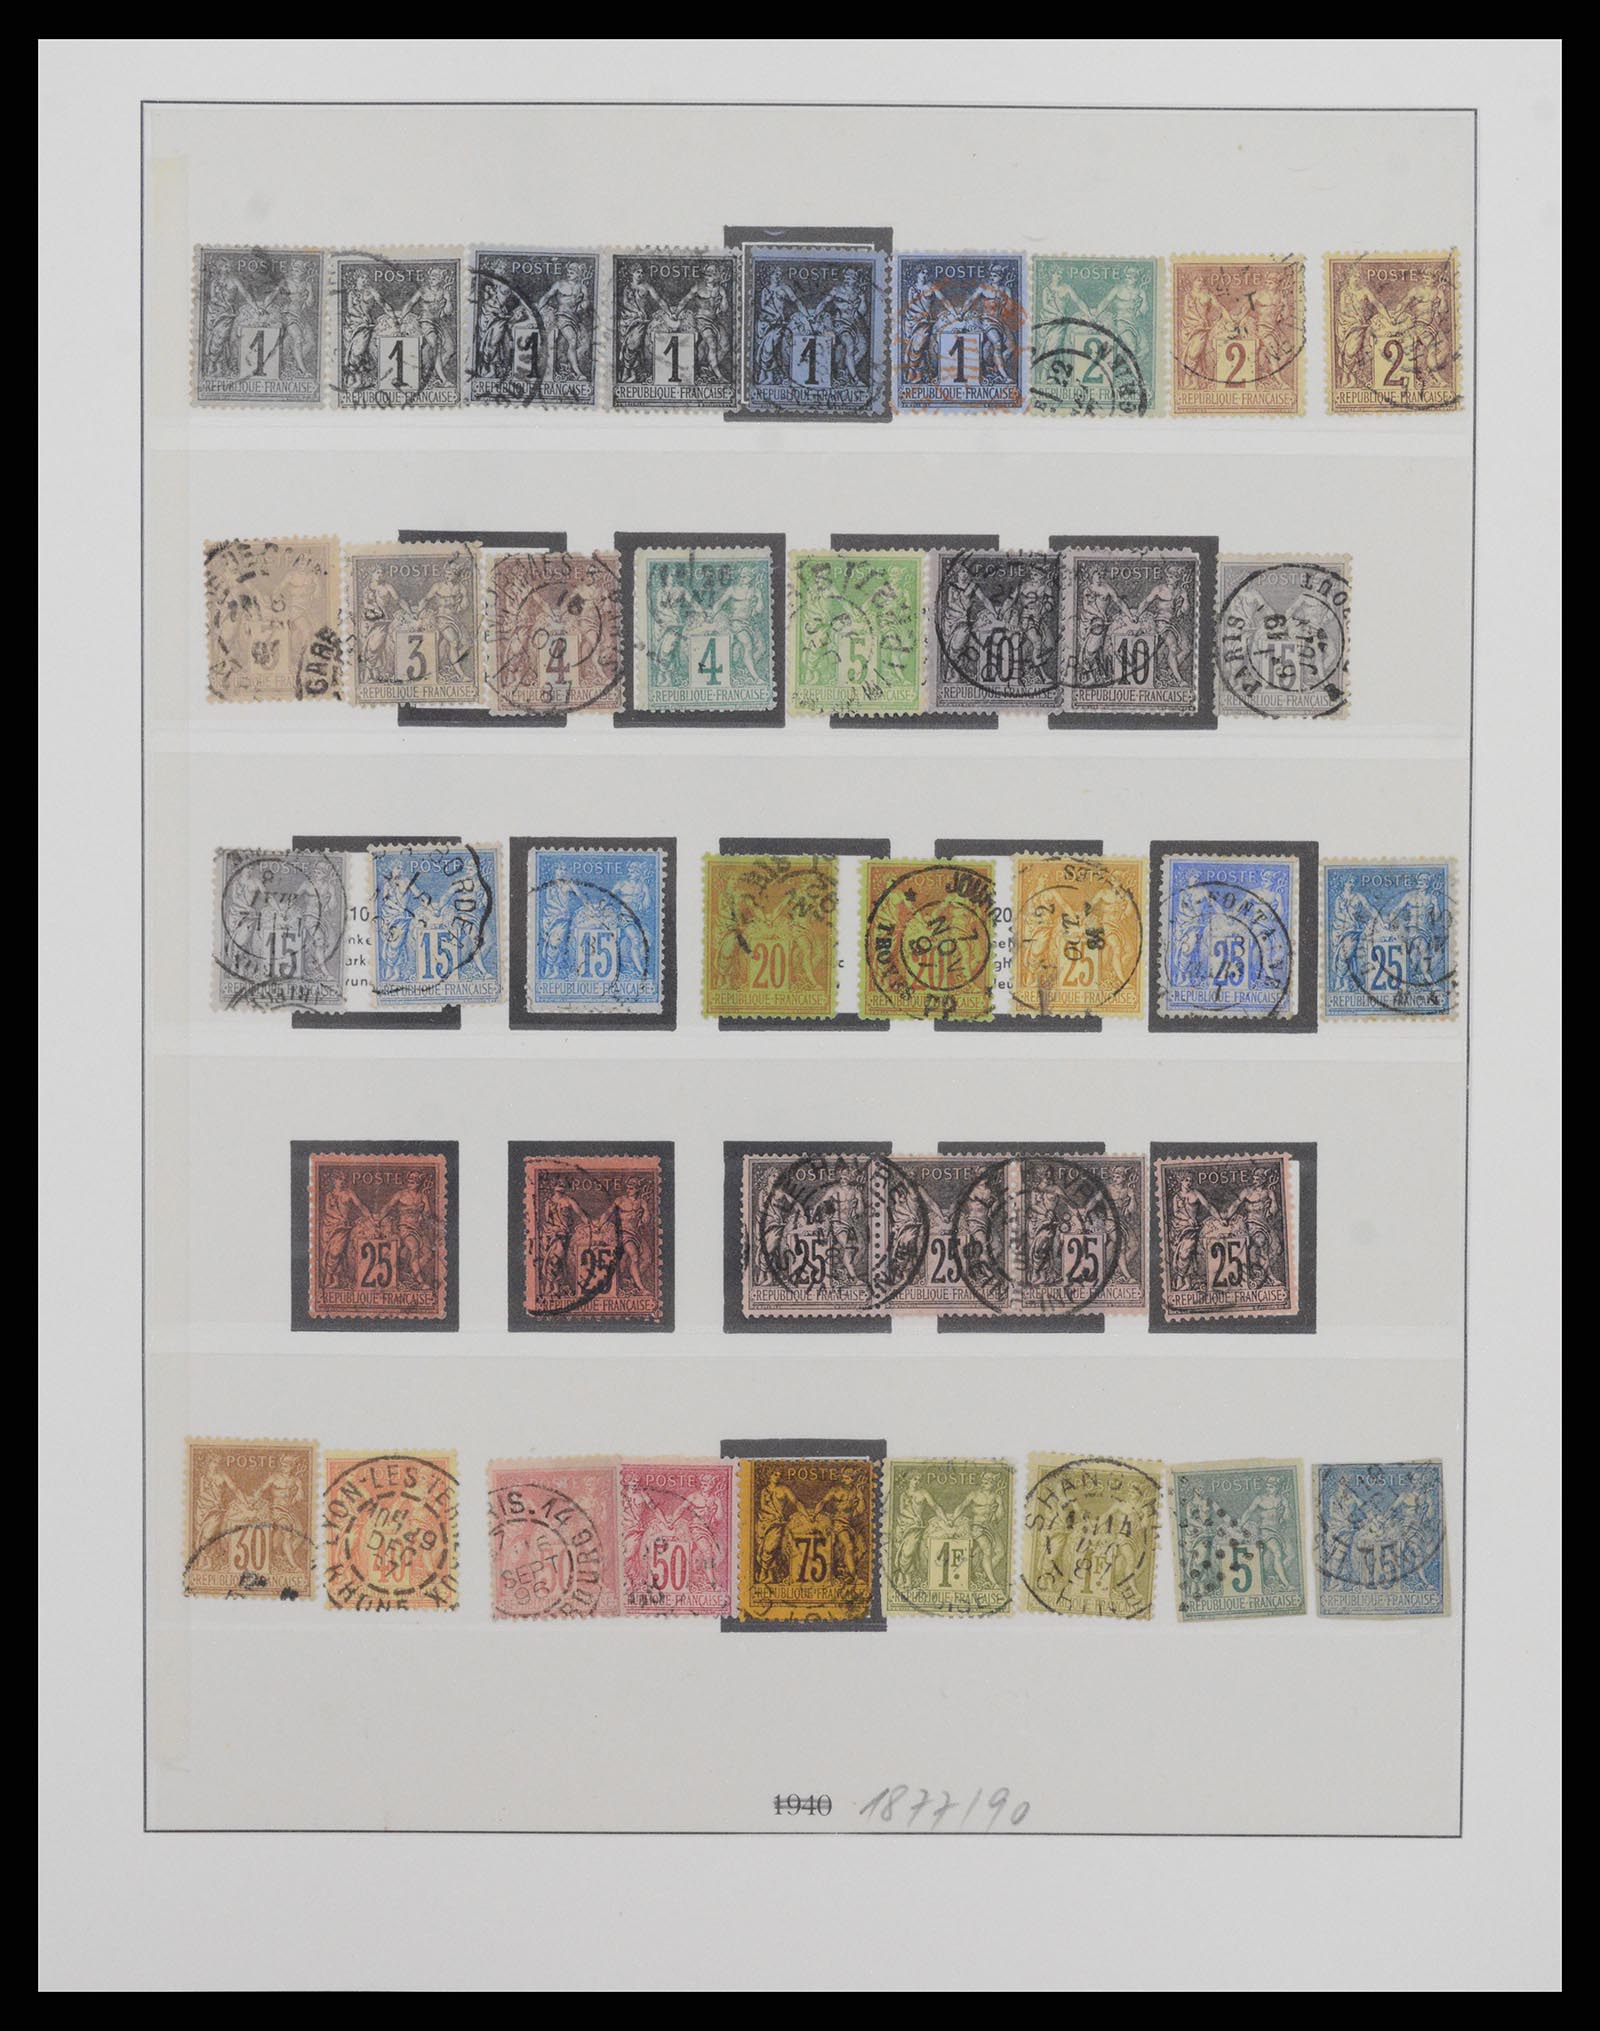 37719 010 - Stamp collection 37719 France 1849-2009.